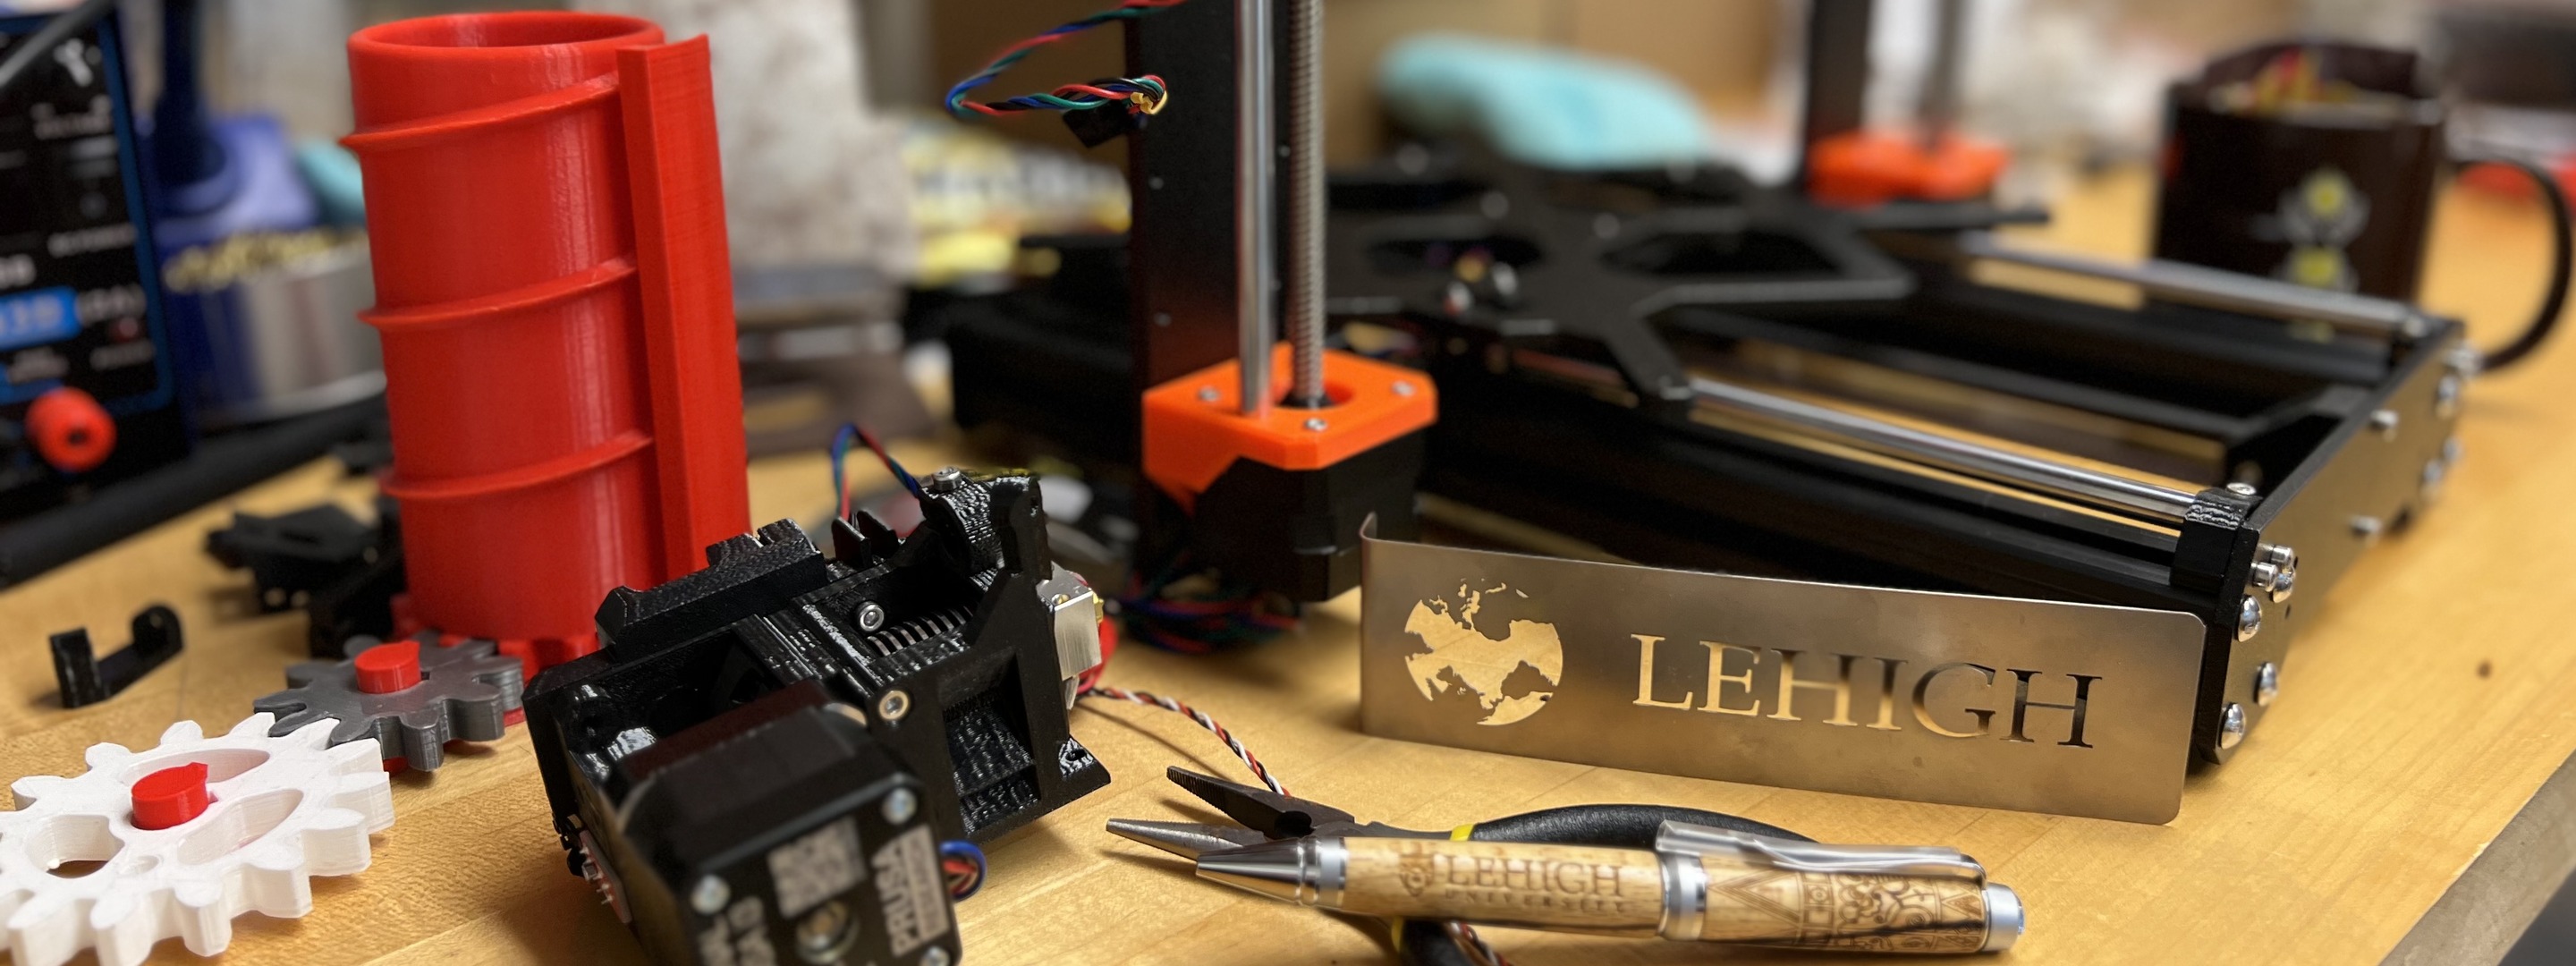 3D printer surrounded by tools and a Lehigh sign